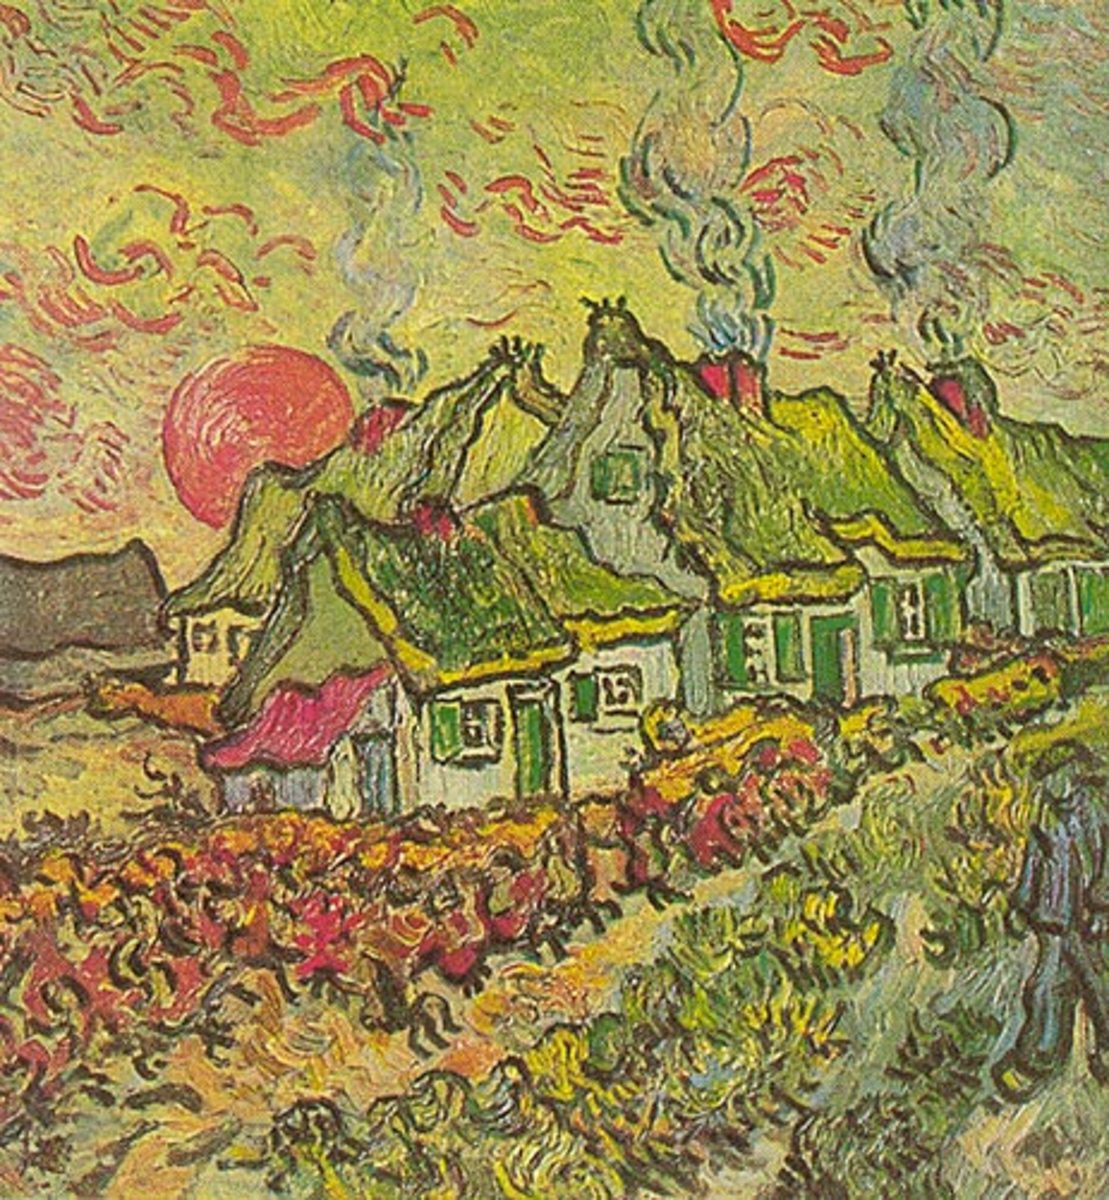 Cottages - Reminiscence of the North, 1890 Vincent van Gogh (1853-1890)